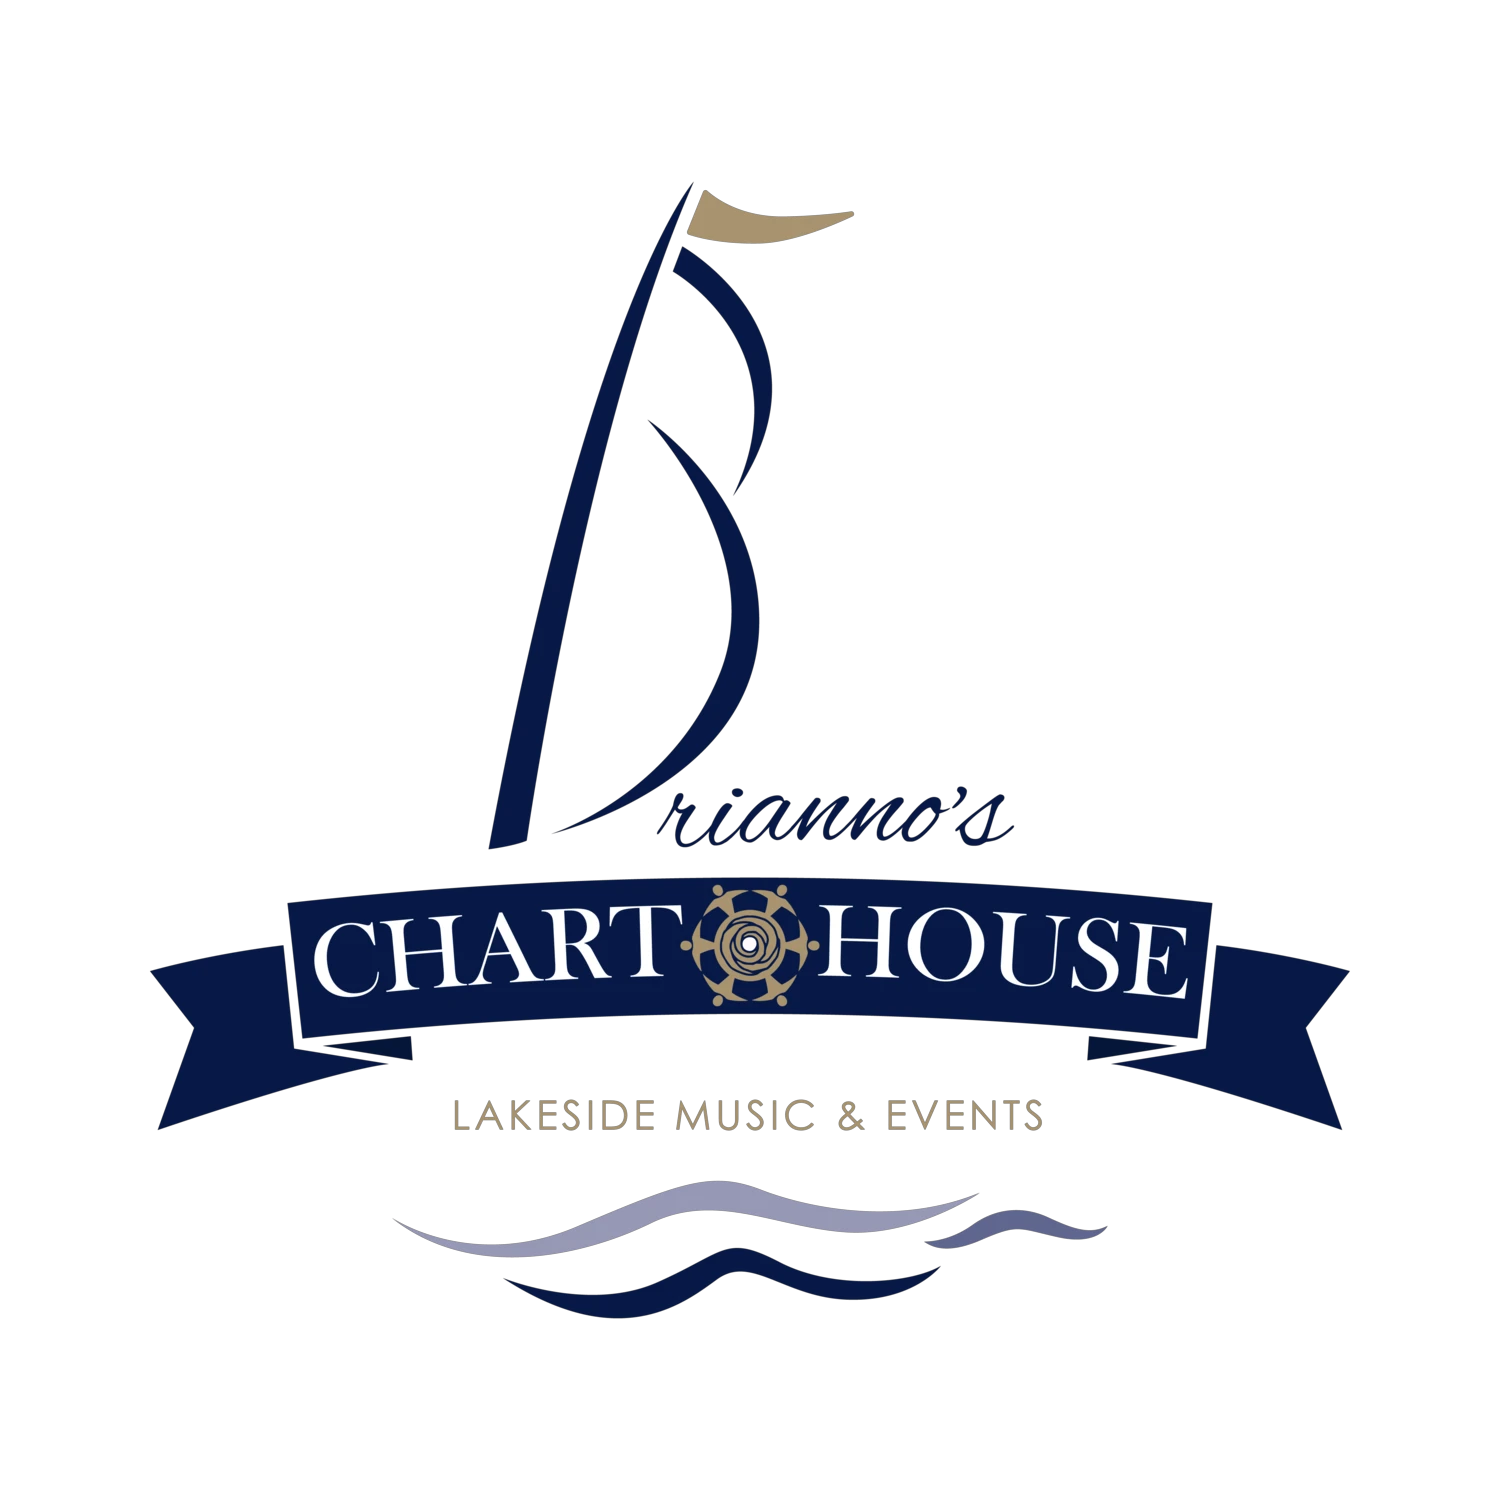 Pick Up Gift Cards At Chart HoUSe Restaurant